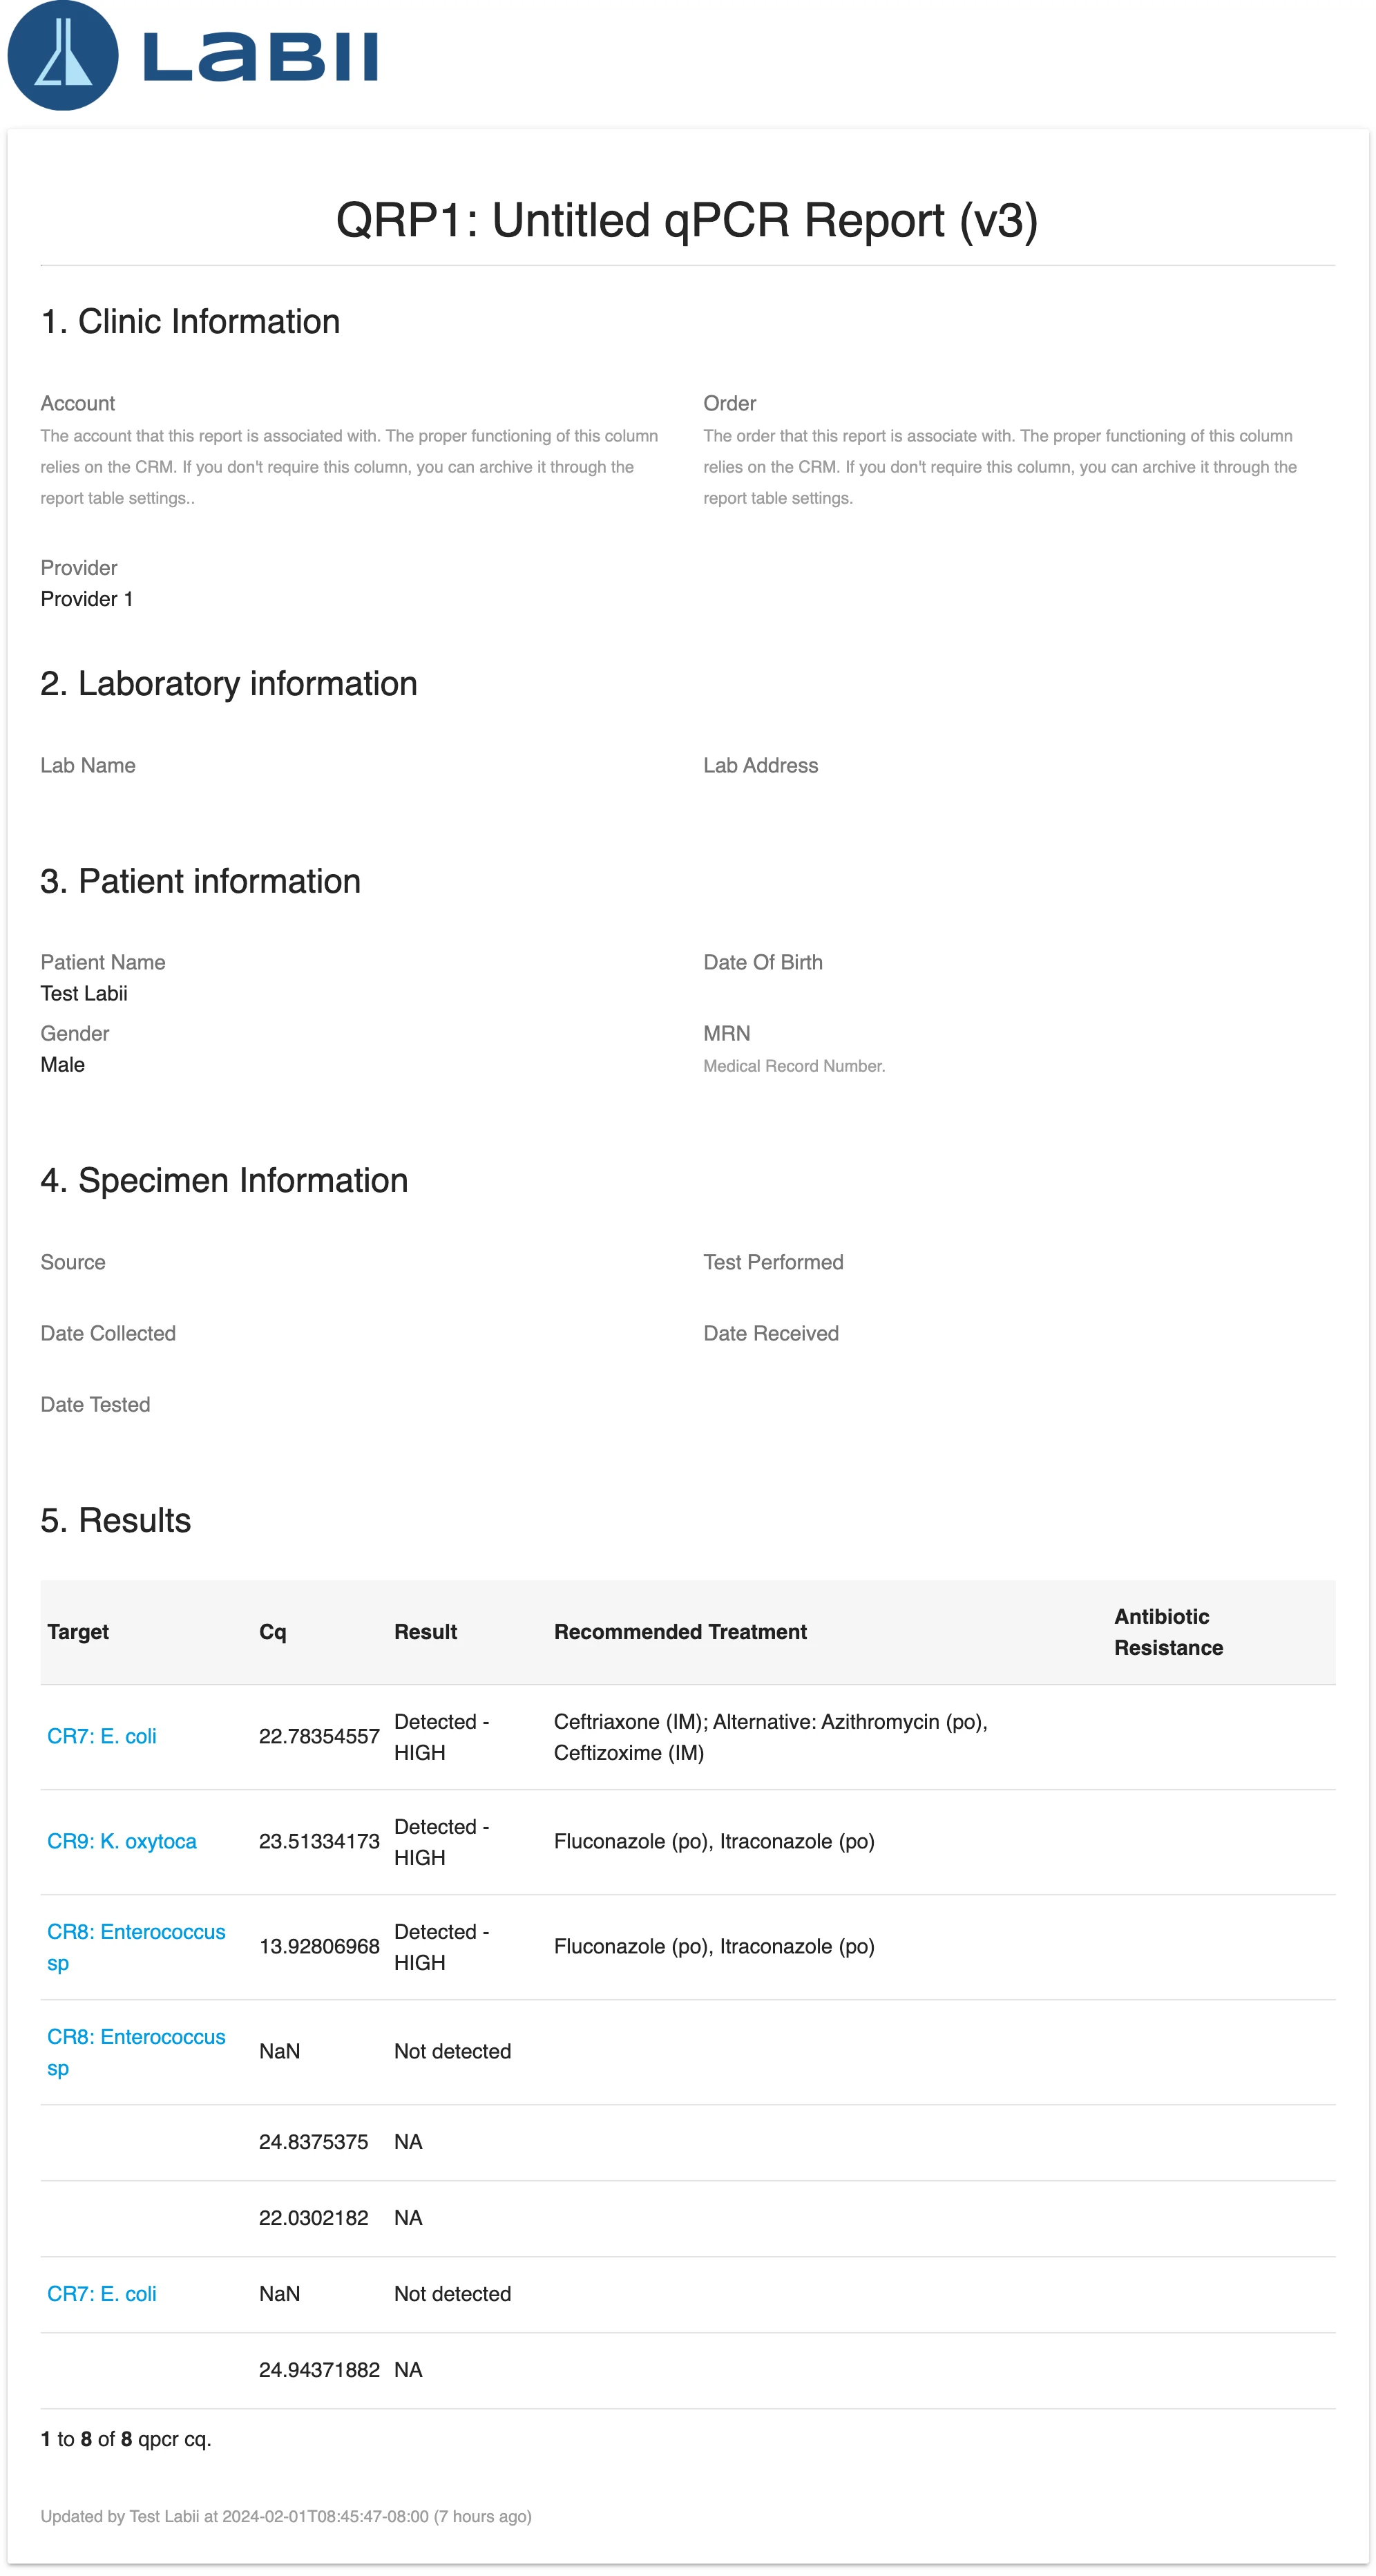 Share Insights Instantly: Labii's Quick Diagnostic Test Report Generation